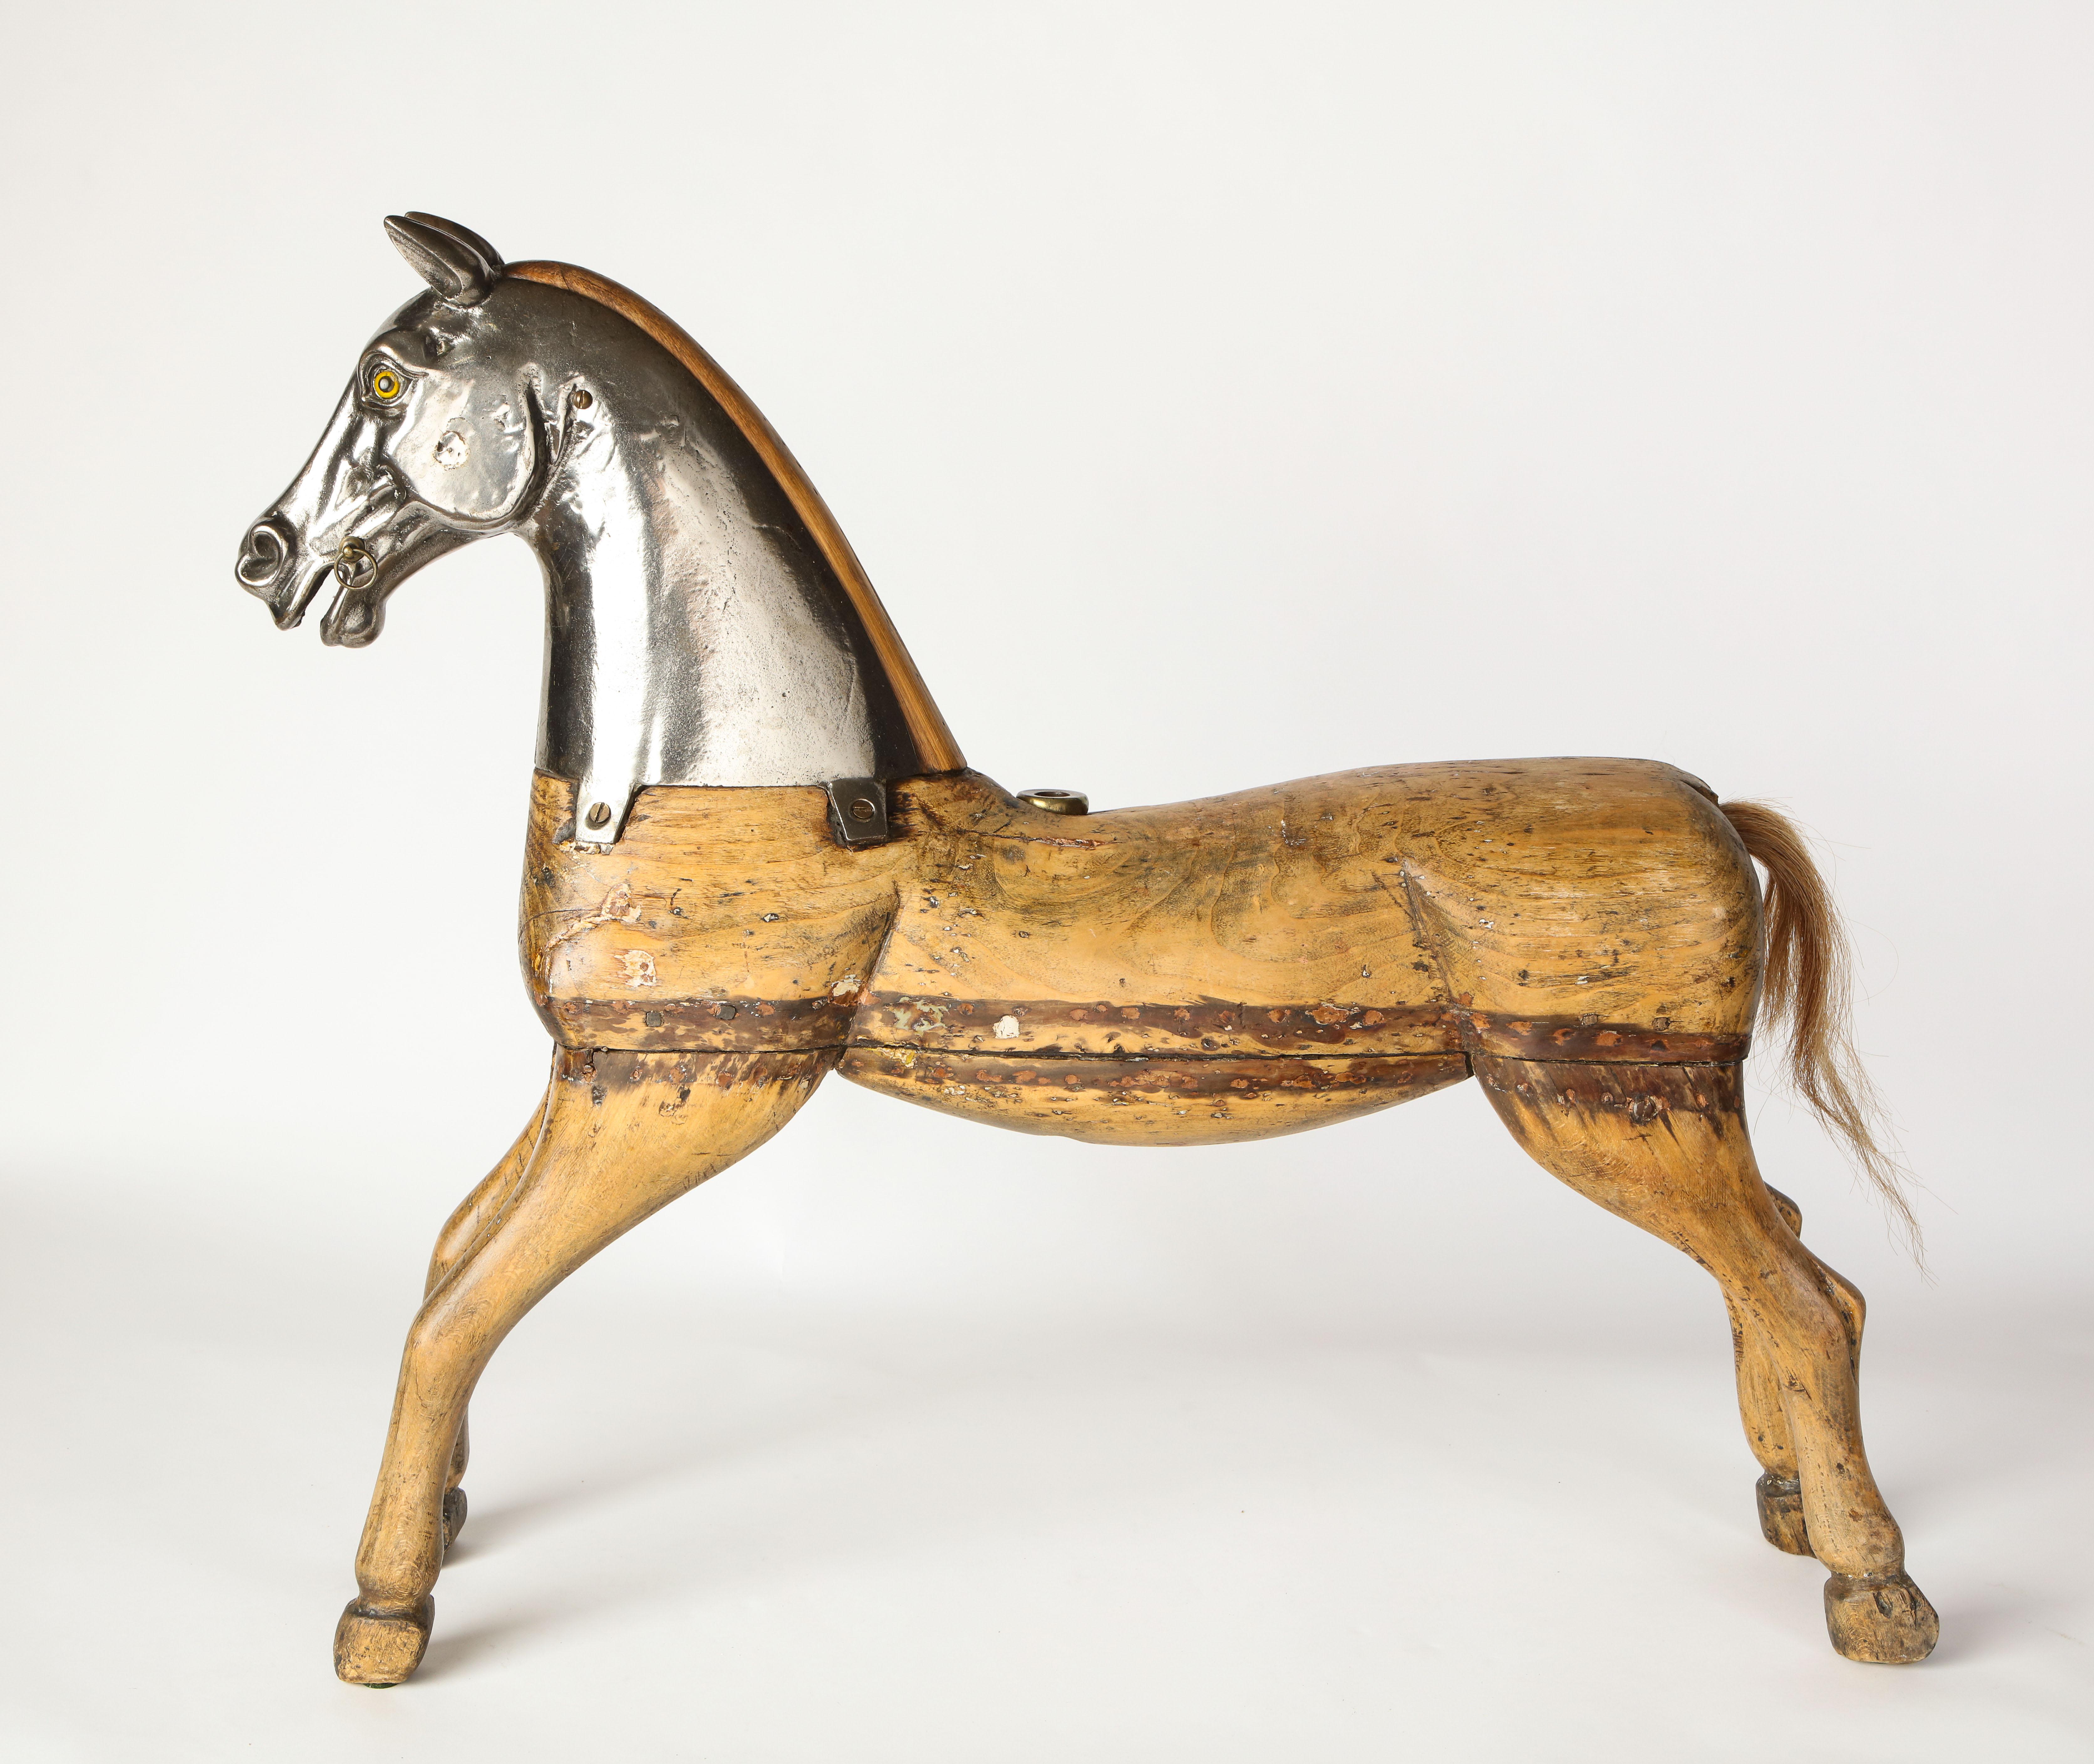 A metal-mounted pine carousel horse from the early 20th century. Modeled as a leaping horse, with inset glass eyes. Its top portion, modeled in metal, beautifully contrasts the bottom portion, modeled in pine, to create a statement decorative